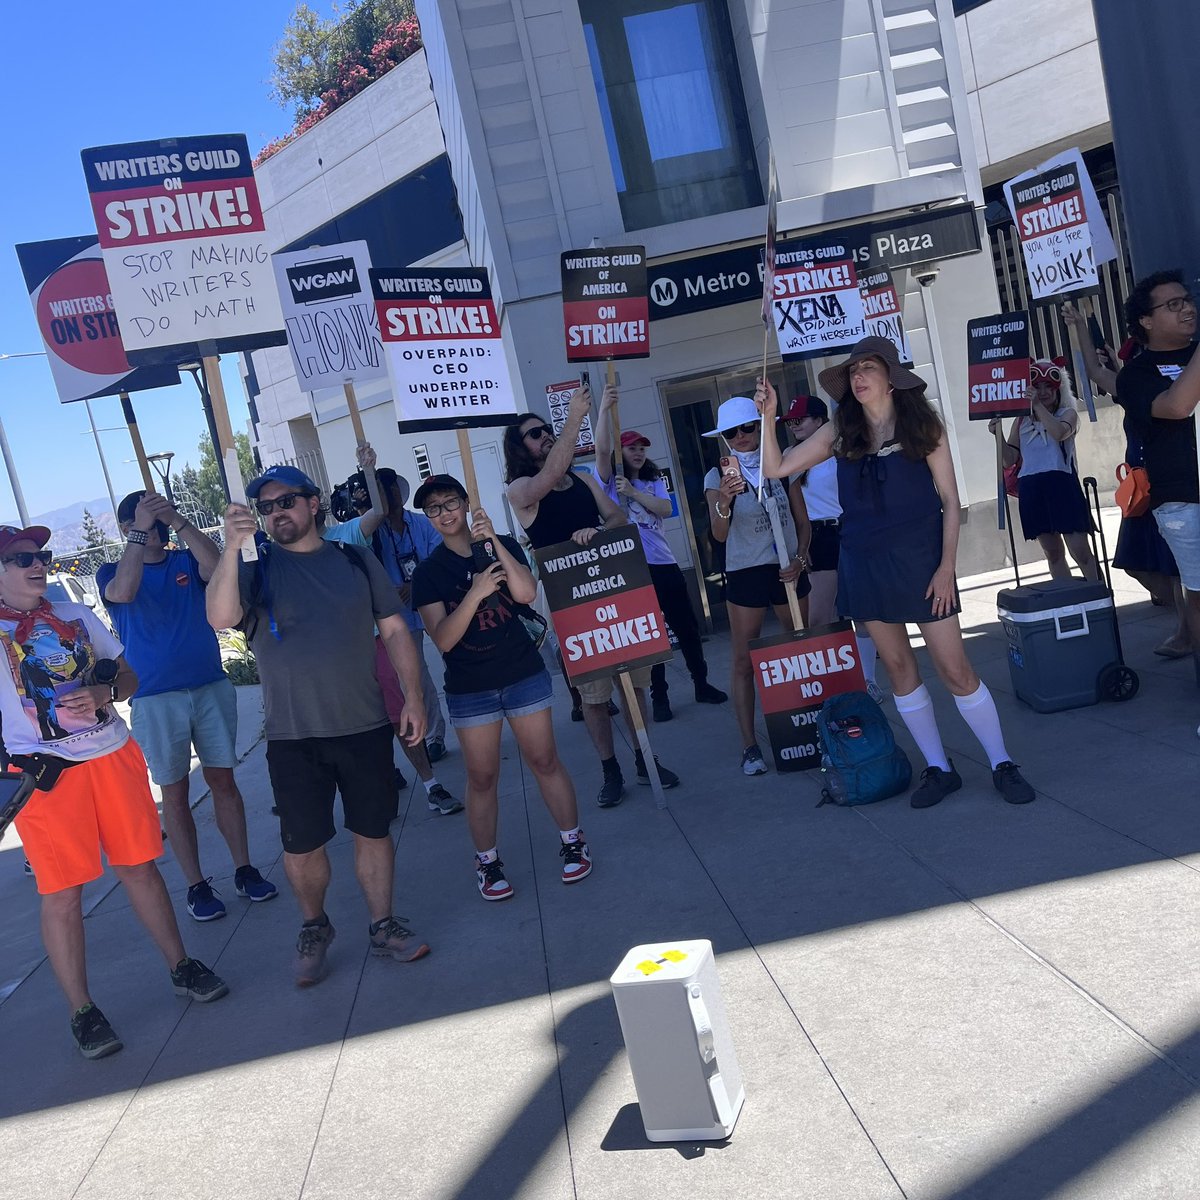 SOLIDARITY!! ✊🏽 Someone put the SAG-AFTRA press conference on the smart speaker at Universal & WGA picketers gathered around it like it's a 30’s radio show. 😊📻 Welcome to the picket line, actors! 👏🏽 #WGAstrong #WGASTRIKE #SAGAFTRASTRIKE #SAGAFTRAstrong